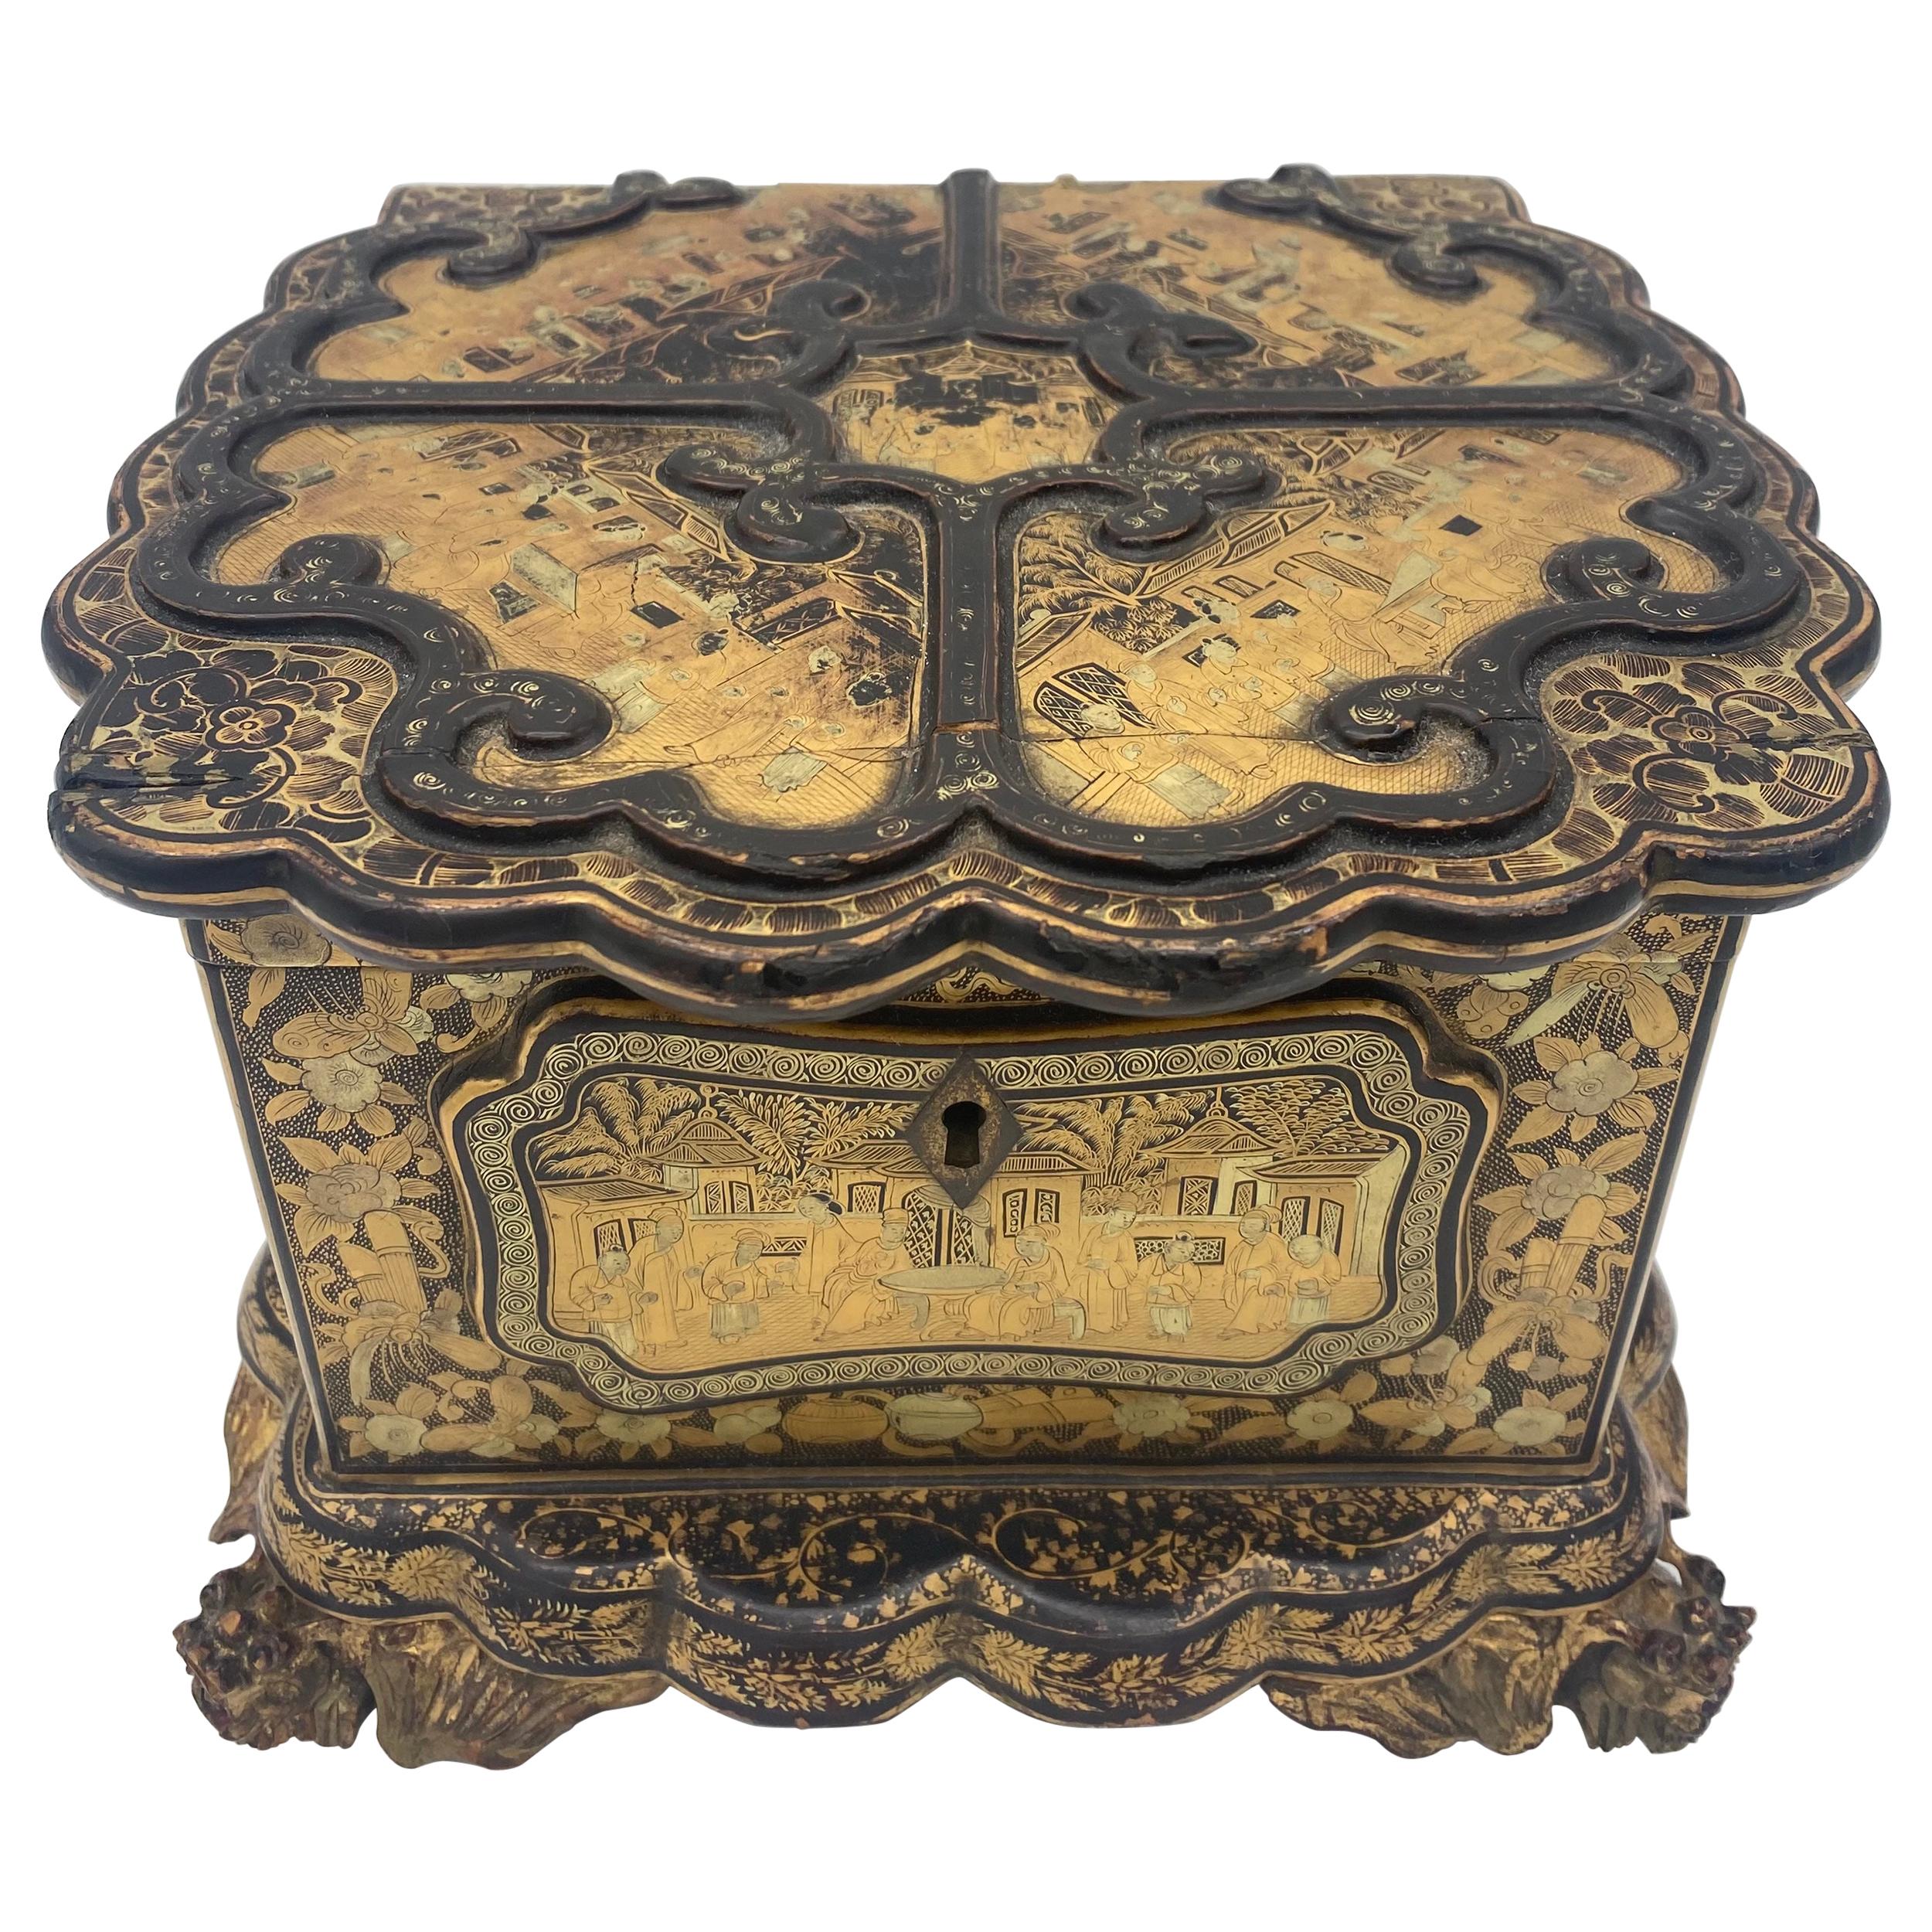 Unique 19th Century  Export Chinese Gilt Chinoiserie Lacquer Box For Sale